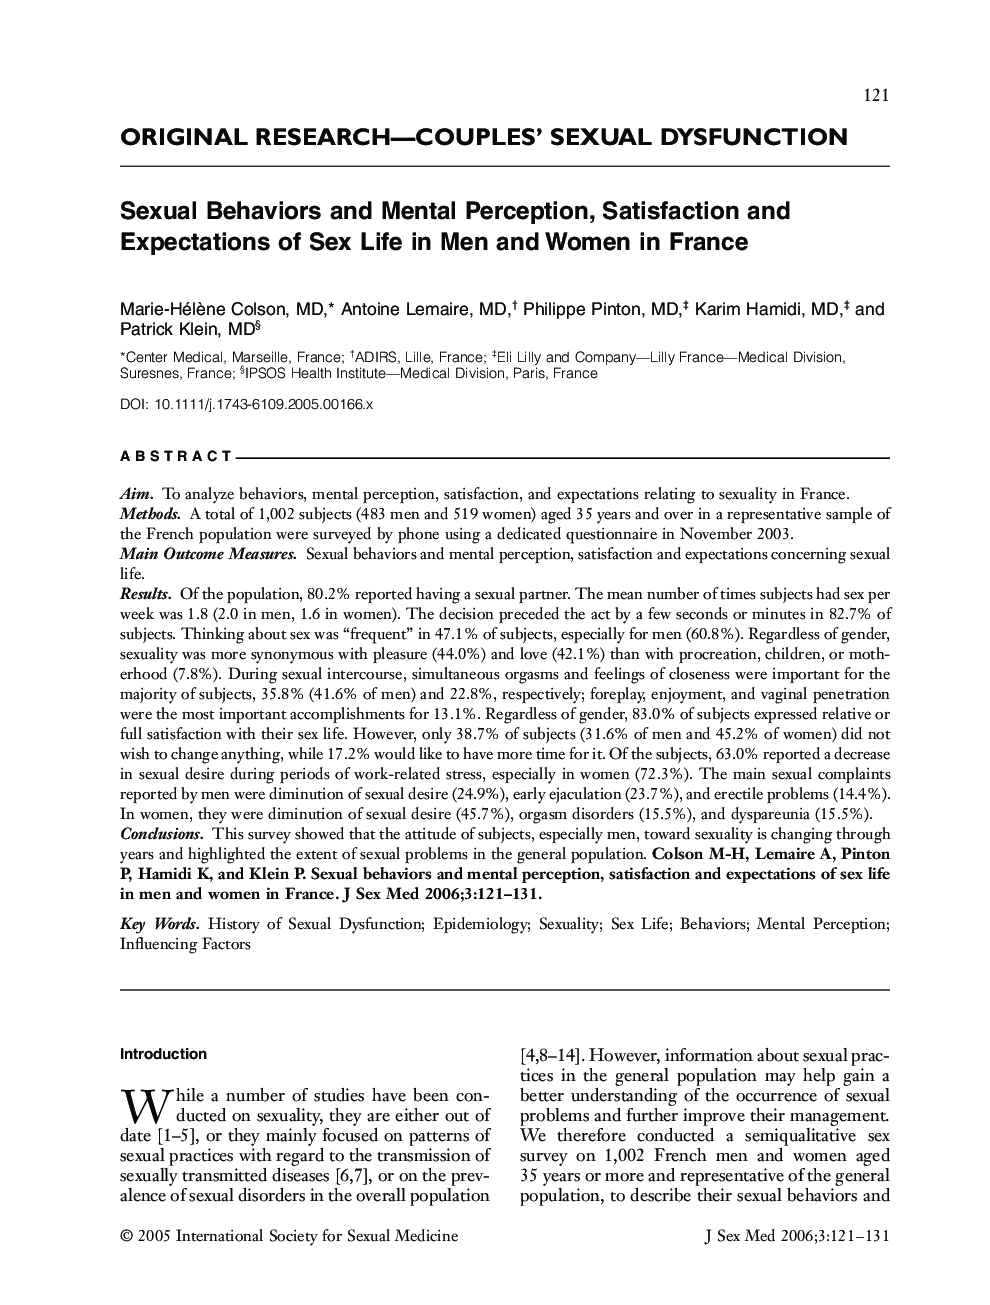 ORIGINAL RESEARCH-COUPLES' SEXUAL DYSFUNCTION: Sexual Behaviors and Mental Perception, Satisfaction and Expectations of Sex Life in Men and Women in France